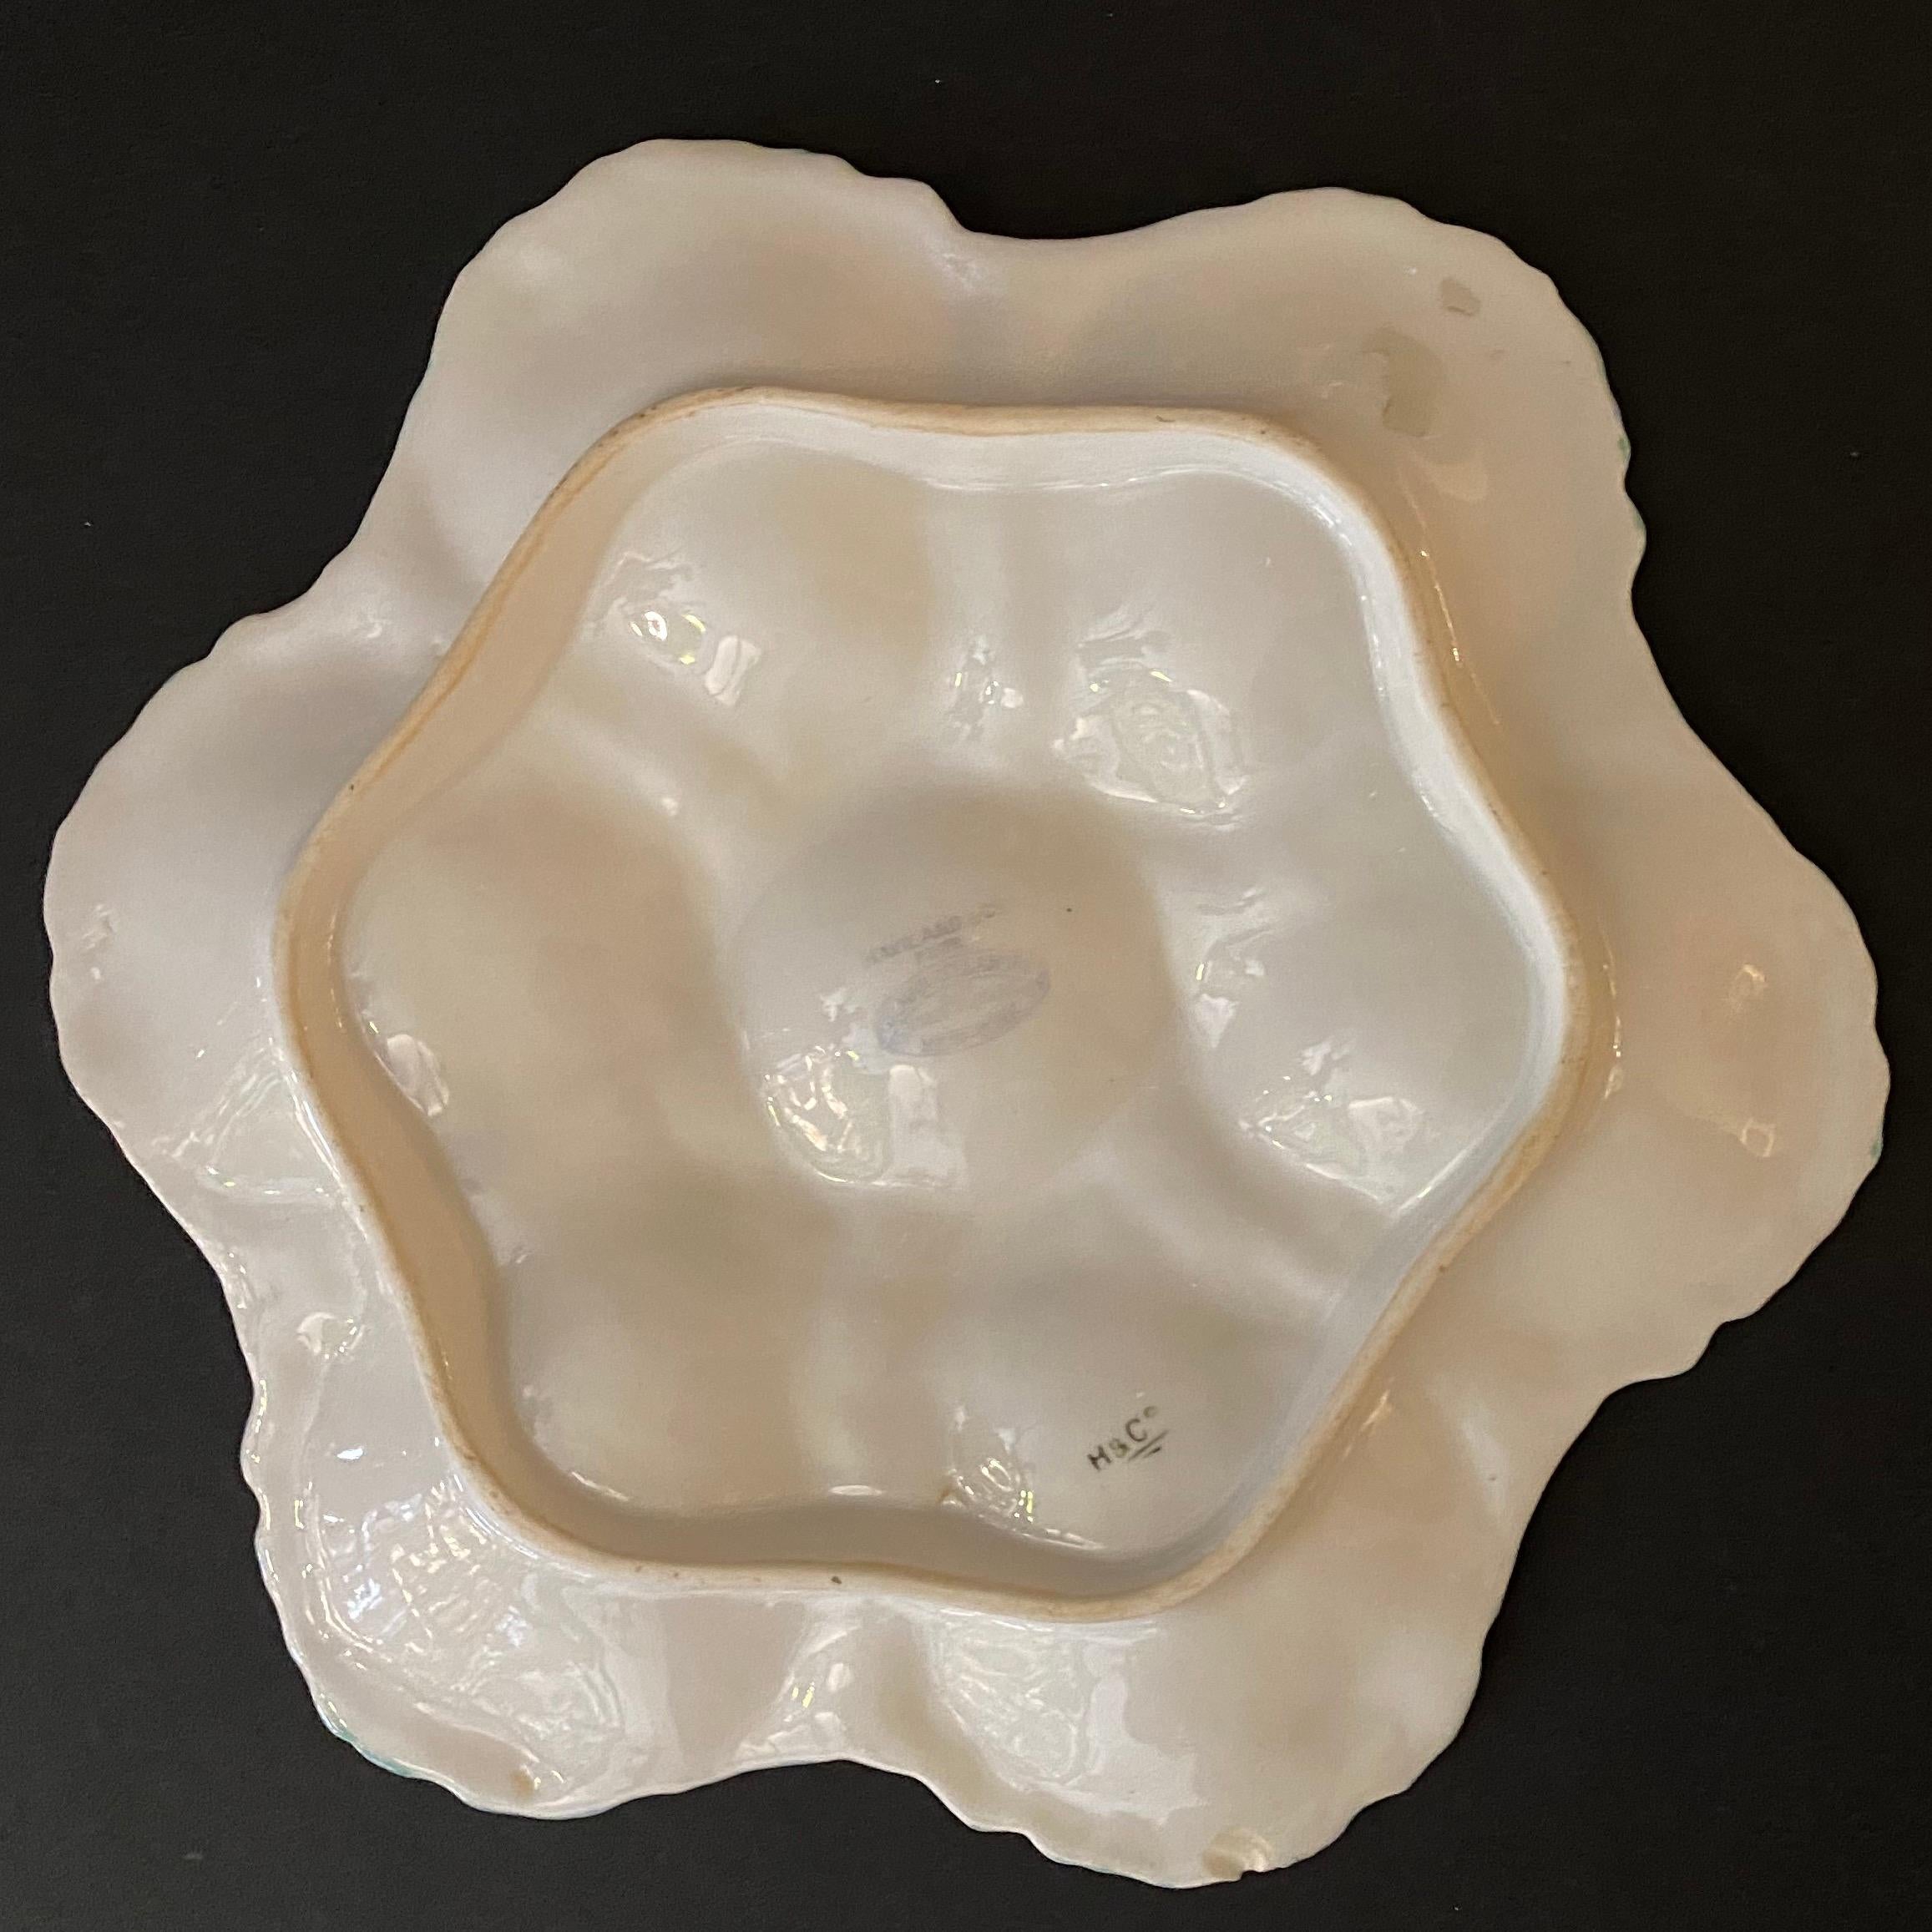 Collector piece, mid-19th century famous Haviland Limoges porcelain oyster plate, with six oyster cradle. The relief of each oyster shells is with refined hand painted details which gives an optical illusion, while the inside of the oysters is